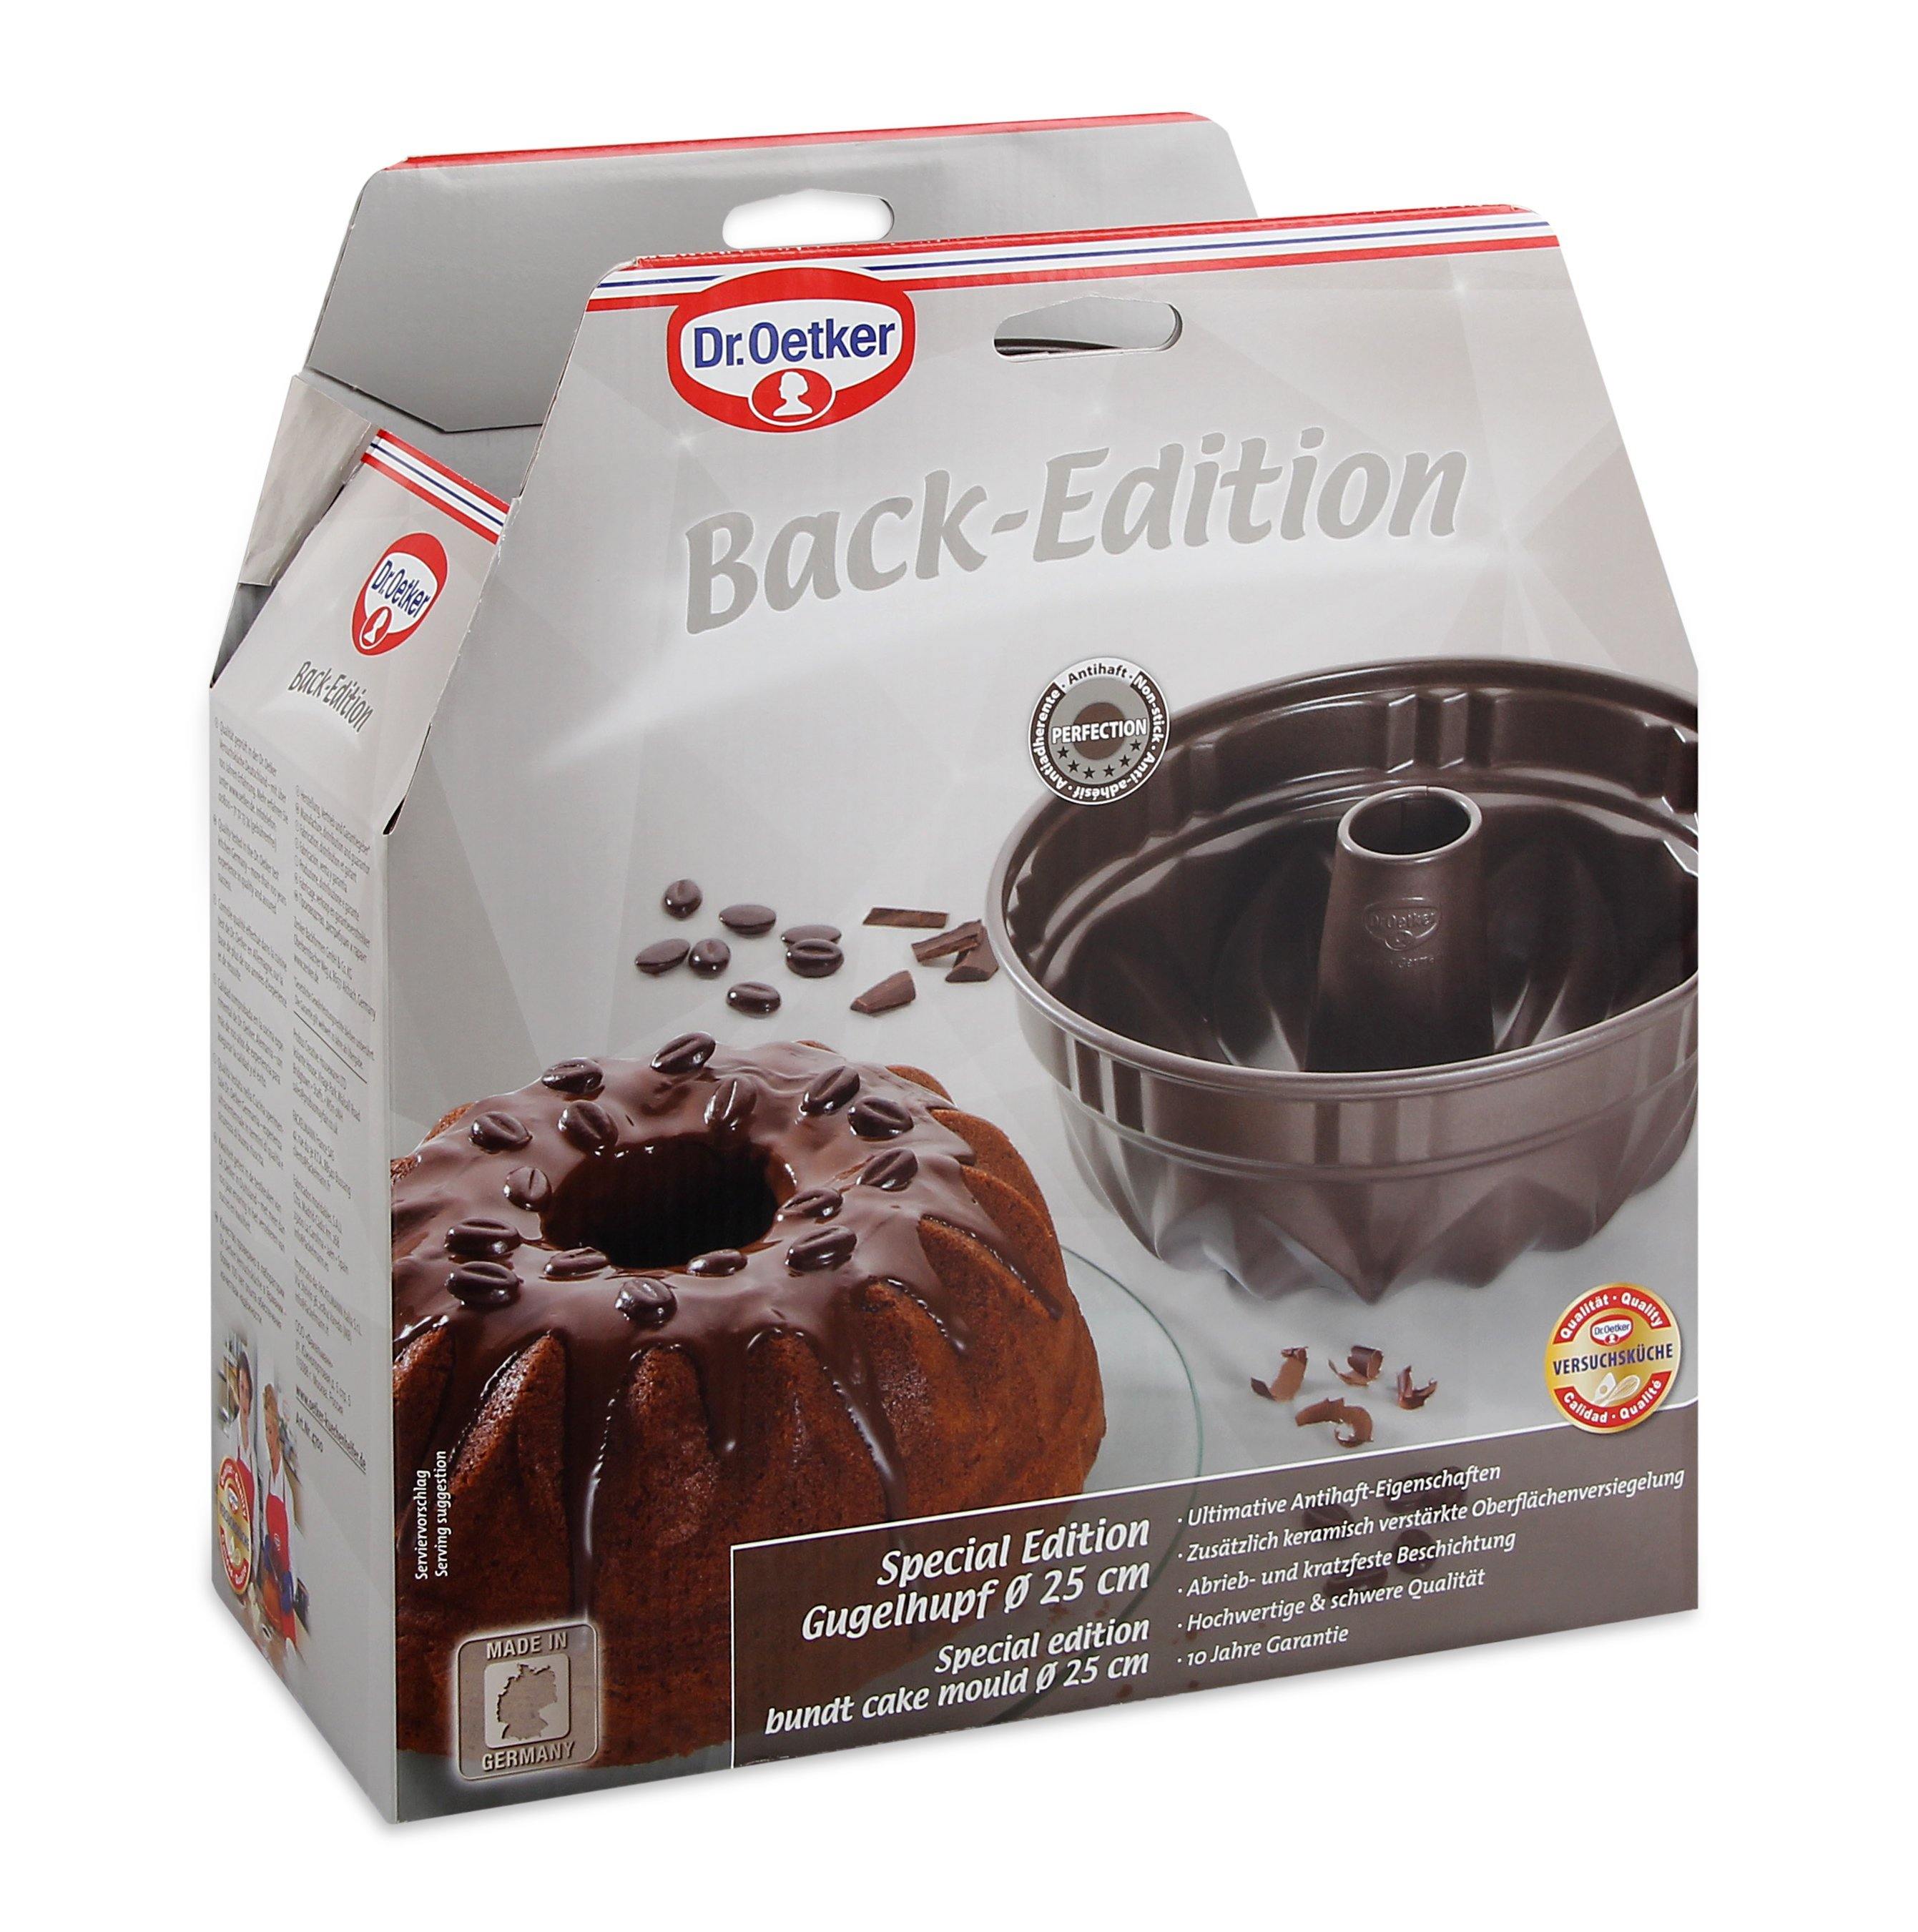 Dr. Oetker "Back-Edition" Special Edition Bundt Cake Mould, Brown, 25X12 Cm - Whole and All